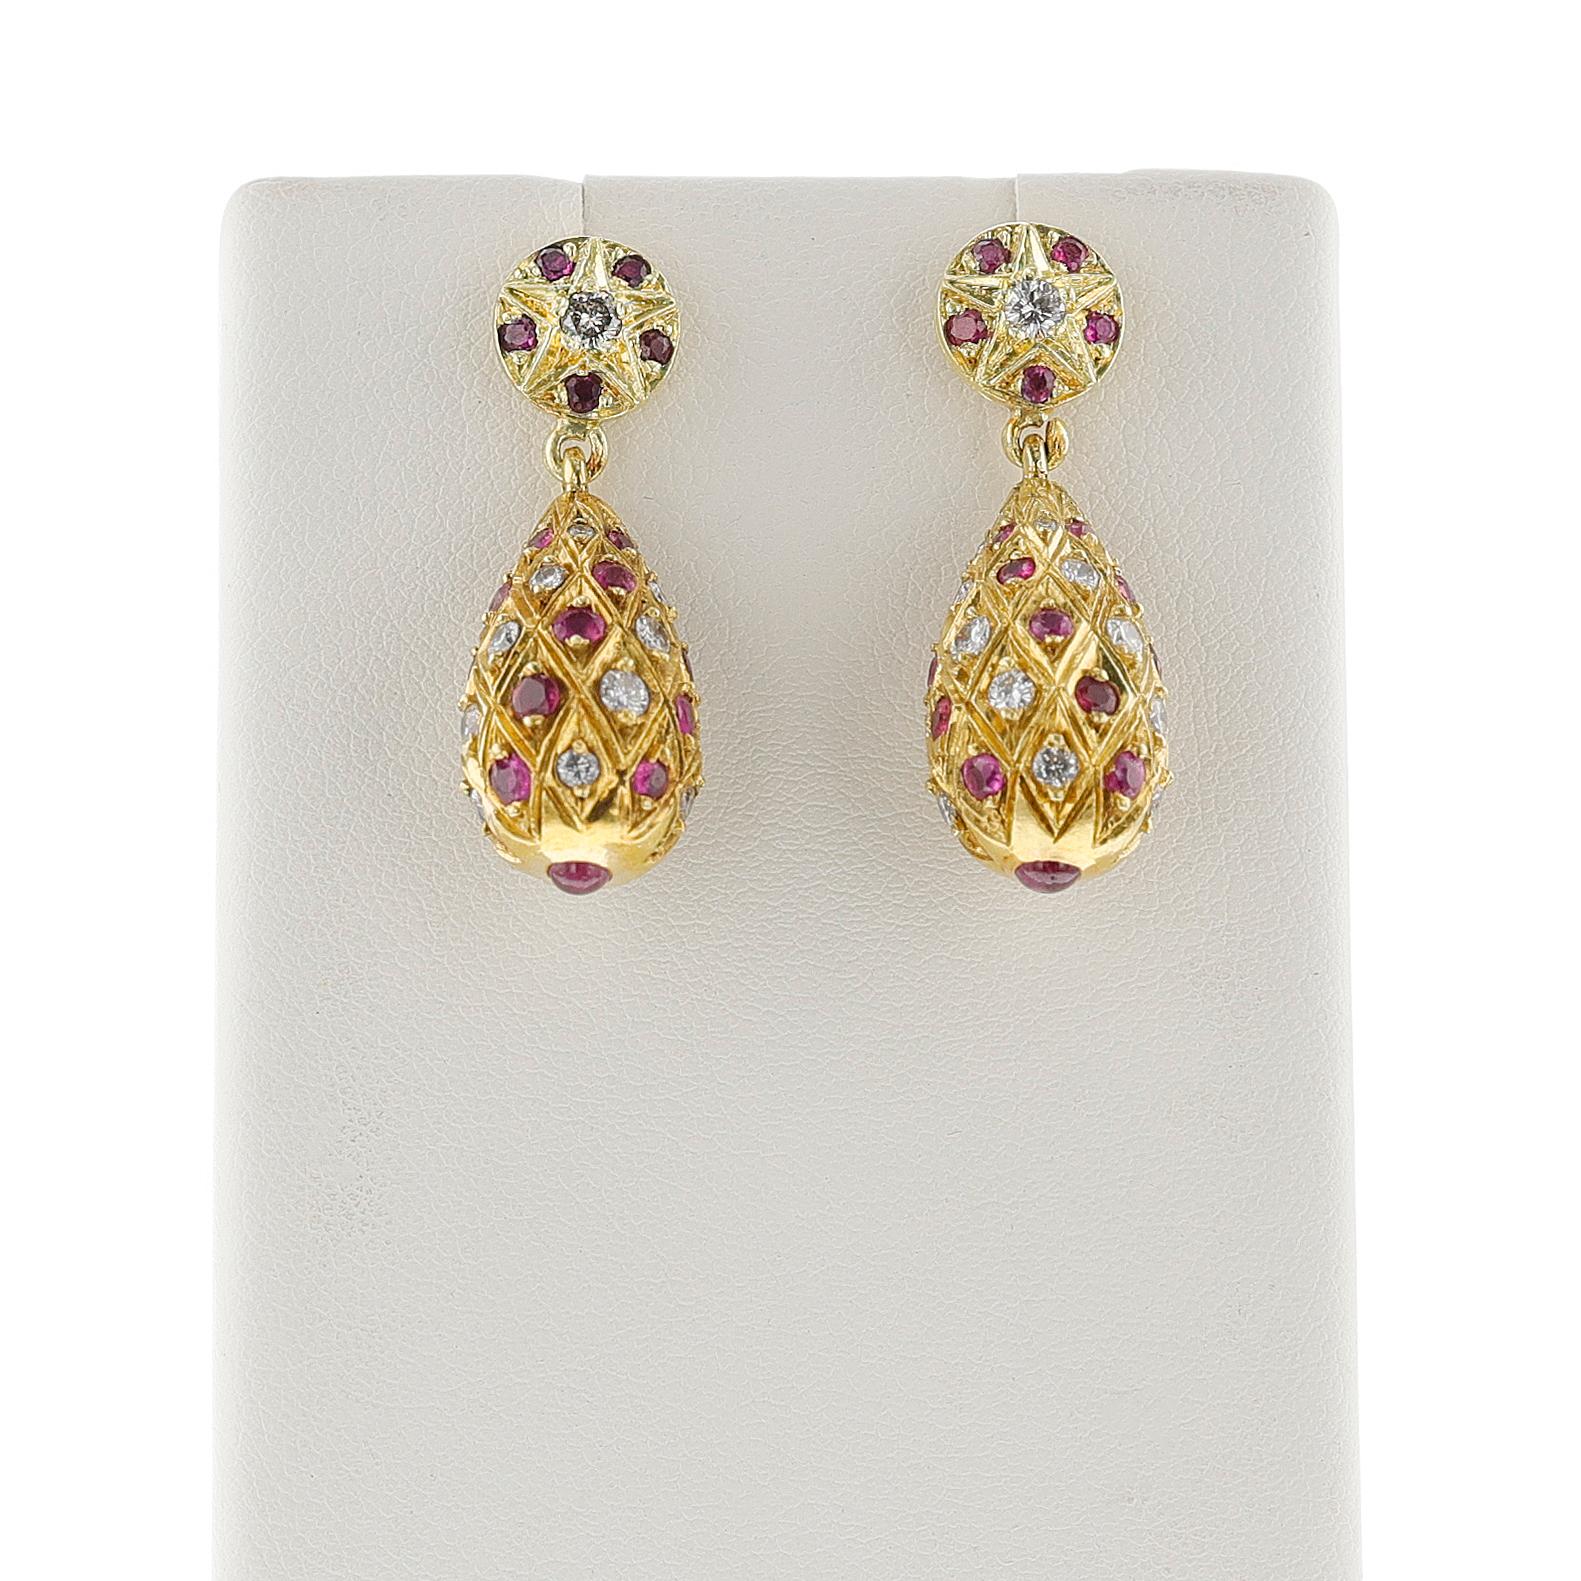 A pair of Ruby and Diamond Dangling Earrings with Gold made in 18k Yellow Gold. The dimensions of the earring is 1.10 x 0.60 inch. The weight of the earring is 12.40 grams.